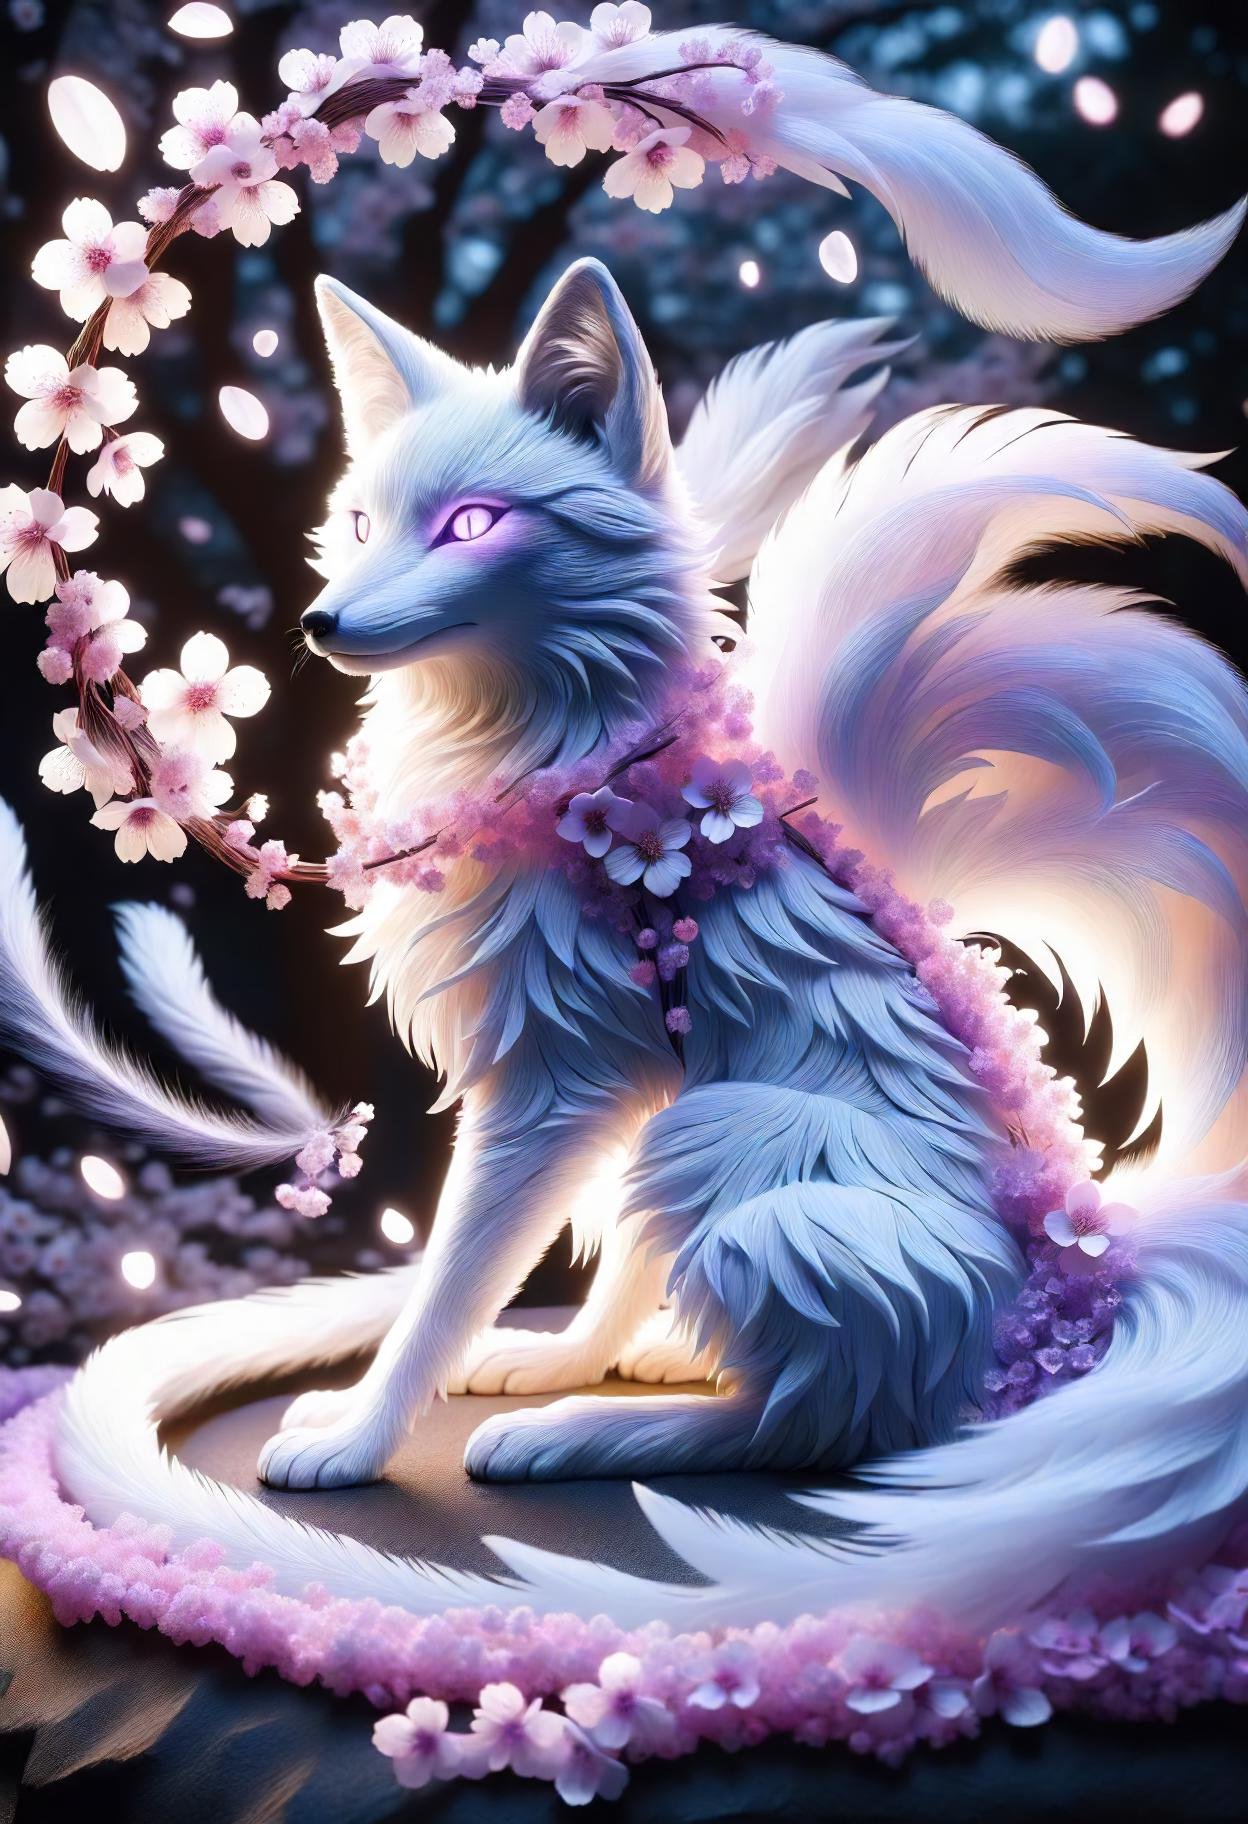 DonMS4kur4XL,sakura blossoms, female kitsune, fox spirit,fox with multiple tails, power, magical enchanting aura,supernatural alluring eyes white and red, intelligence, trickery,wisdom, supernatural feats, early twenties, curvy, indigenous peoples of the america, violet eyes,    underbite jaw, soft cheeks, high forehead,  well-formed back muscles,   , violet low ponytail hair, regret, engrossed in deciphering cryptic texts, surrounded by ancient scrolls, feathered wings     warlock, shadow magic , using a staff to amplify magical energy, connecting with its power, radiant aura   <lora:released\DonM3t3rn1tyXL-v1.1-000008:0.8><lora:myLora\DonMS4kur4XL-000006:0.8>